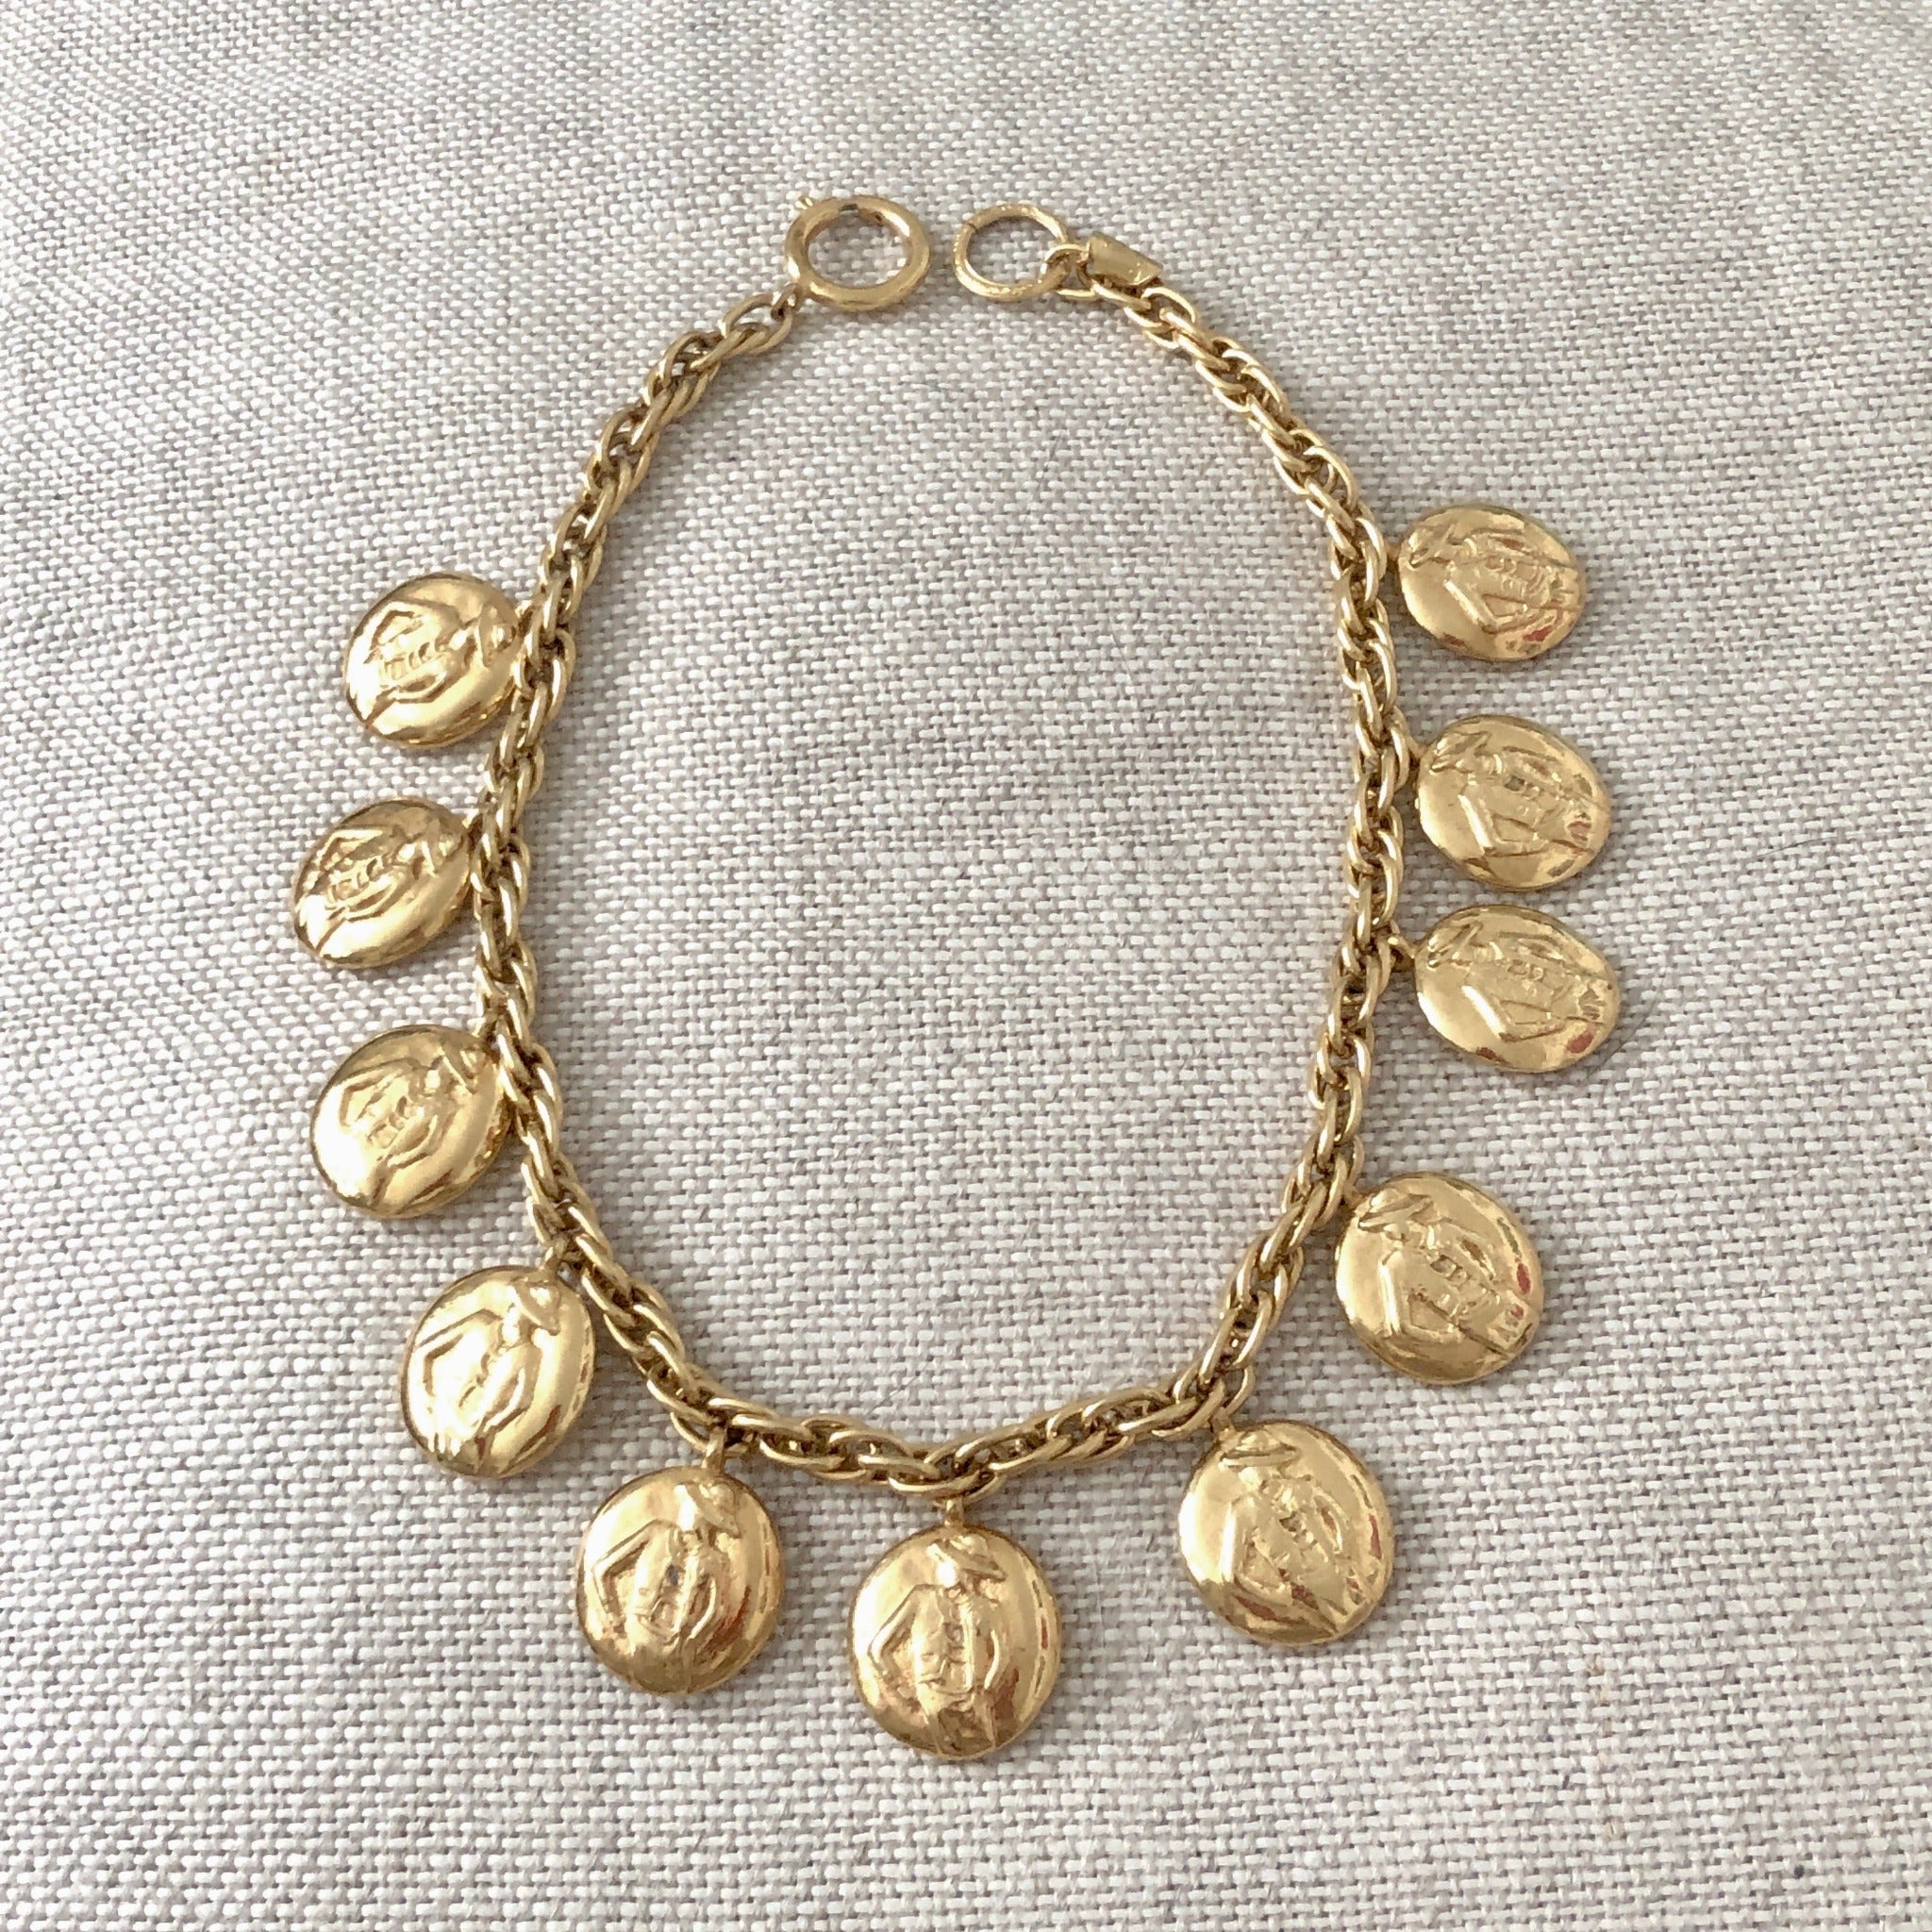 Vintage Chanel Necklace with Reversible Charms – Very Vintage